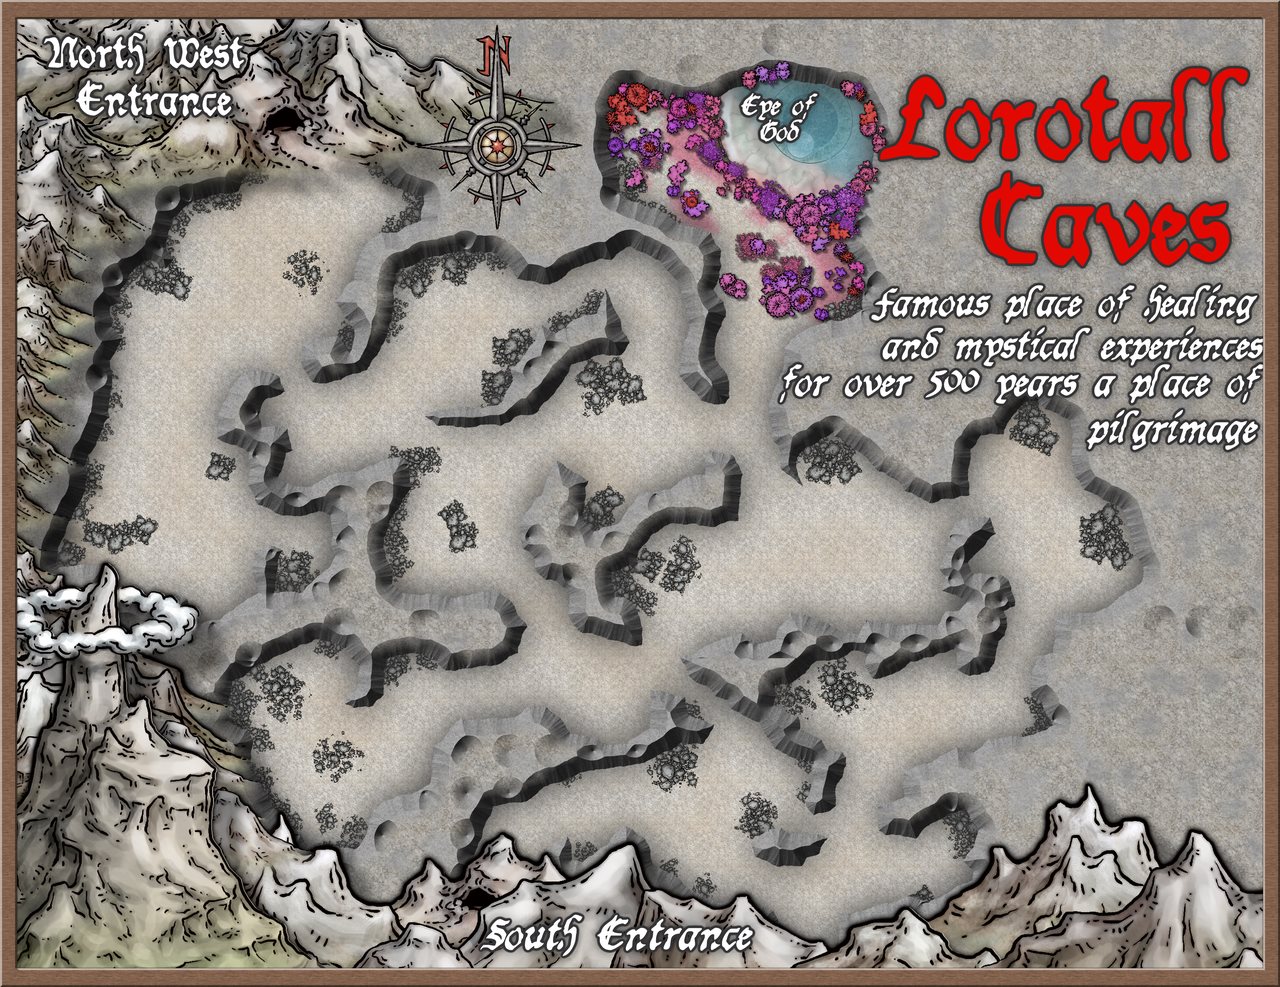 Nibirum Map: lorotall caves by Ricko Hasche